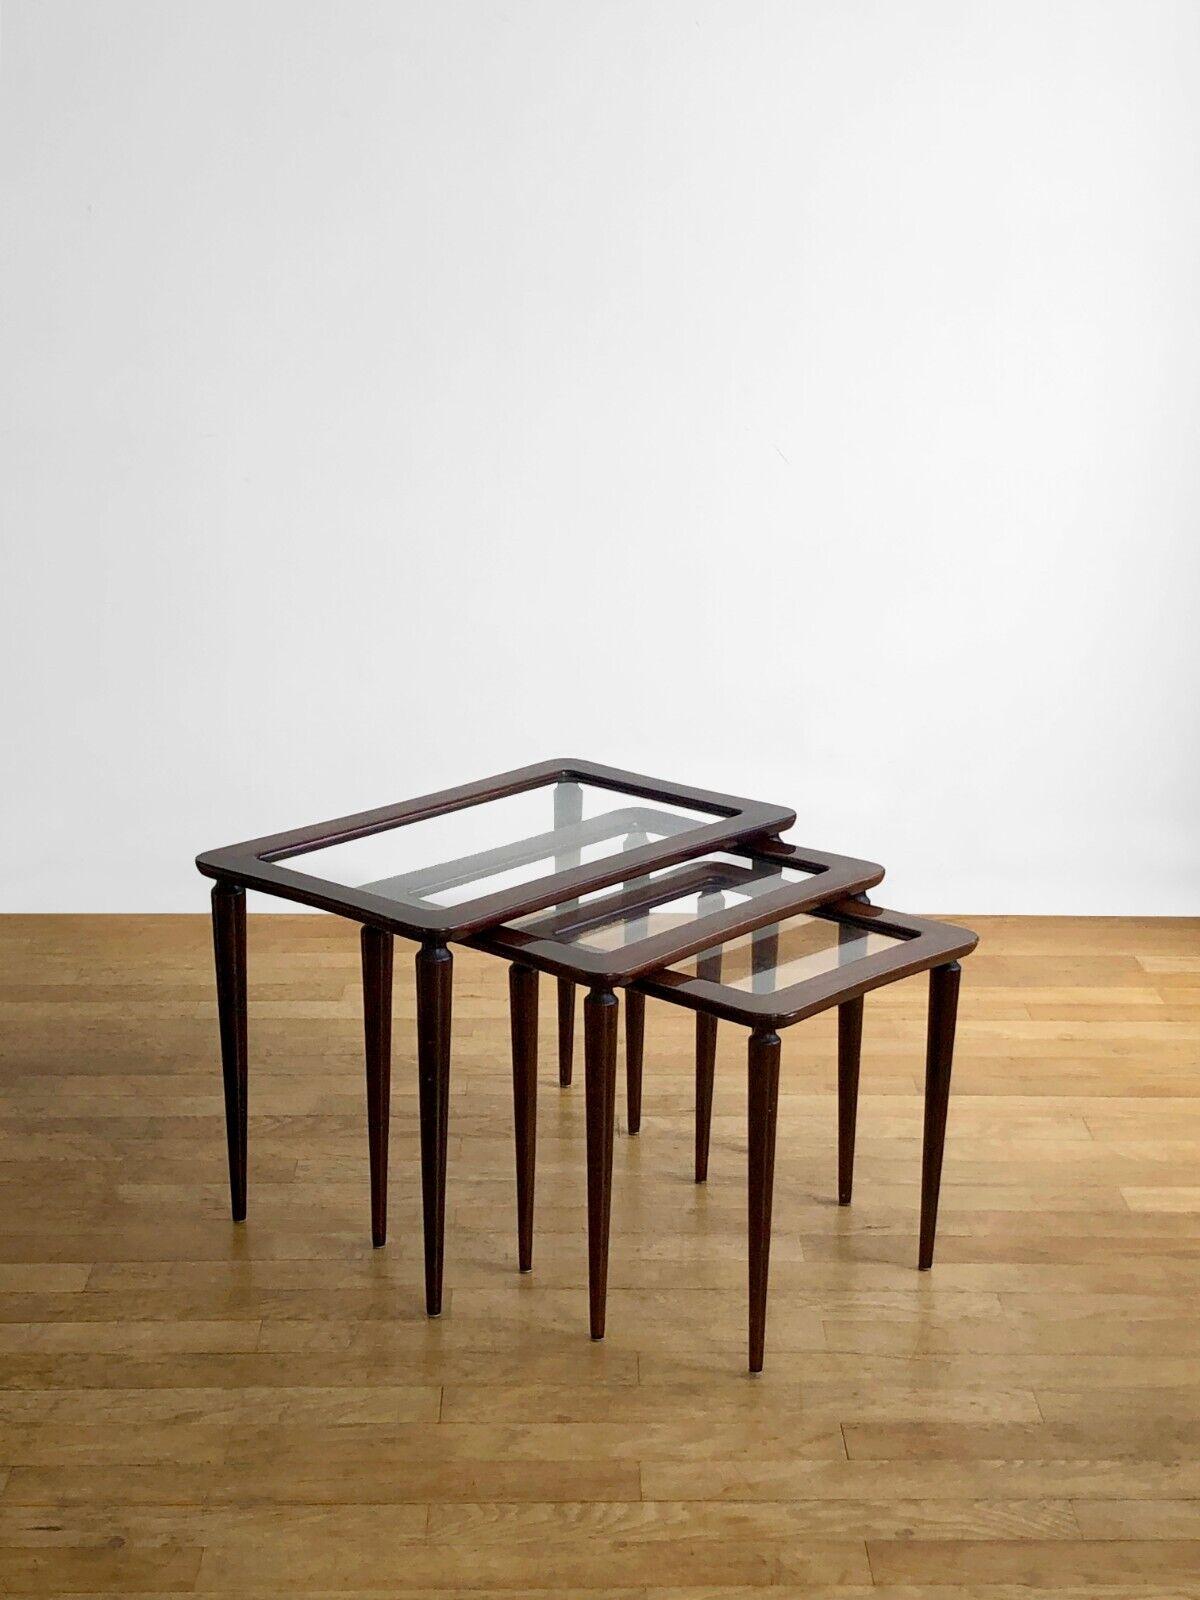 A beautiful and luxurious set of 3 Nesting Tables, side tables, bedside tables or end tables, Modernist, Free Form, in varnished mahogany and original glass tops, Model 401 by Ico Parisi edition De Baggis, Italy 1950.

DIMENSIONS:
H 44.8 x W 63.6 x